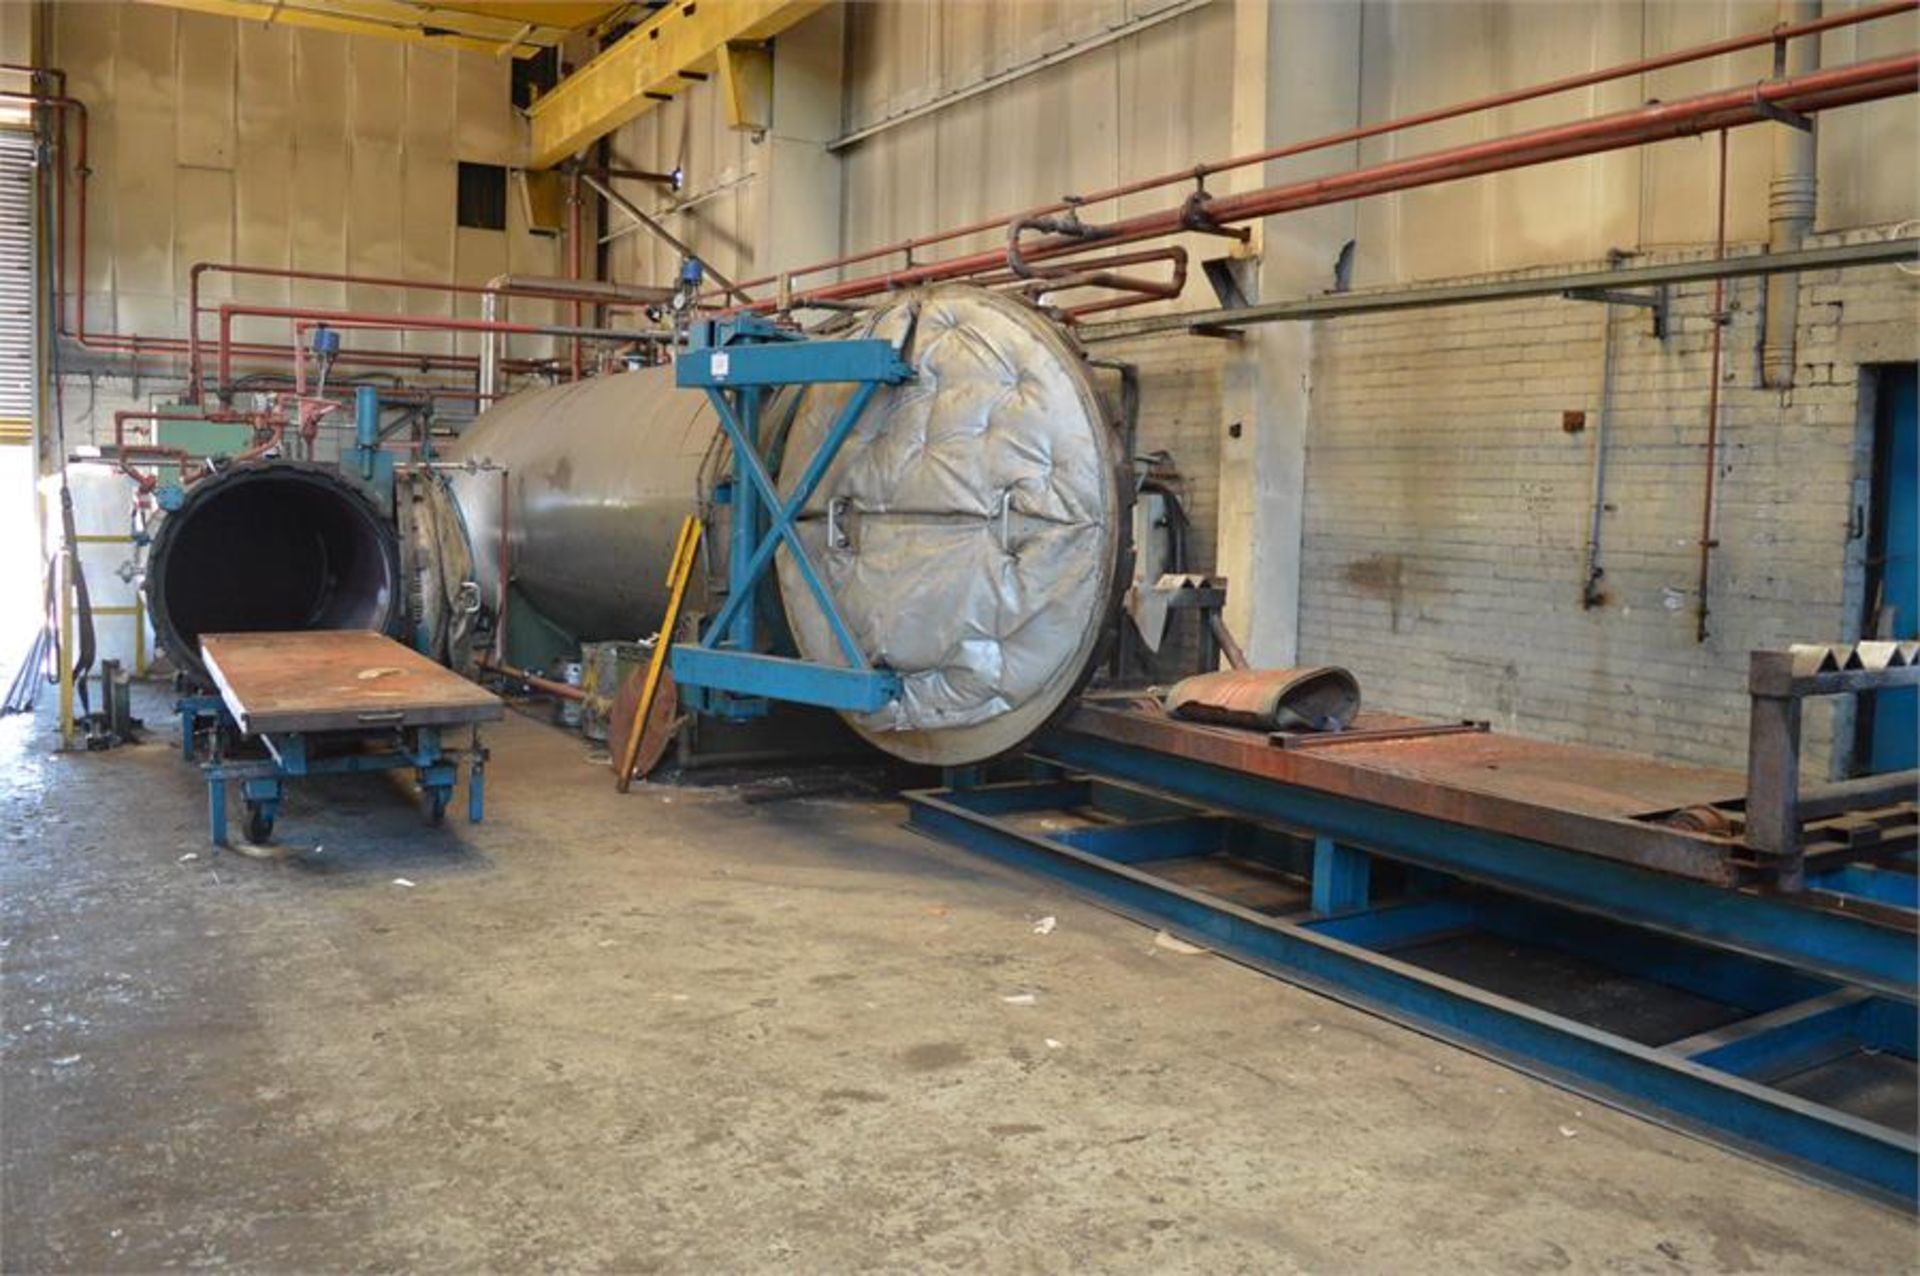 2 x Unbadged mild steel Autoclaves, steam heated, 1800 x 5500mm and 1200 x 3000mm with Bradlee